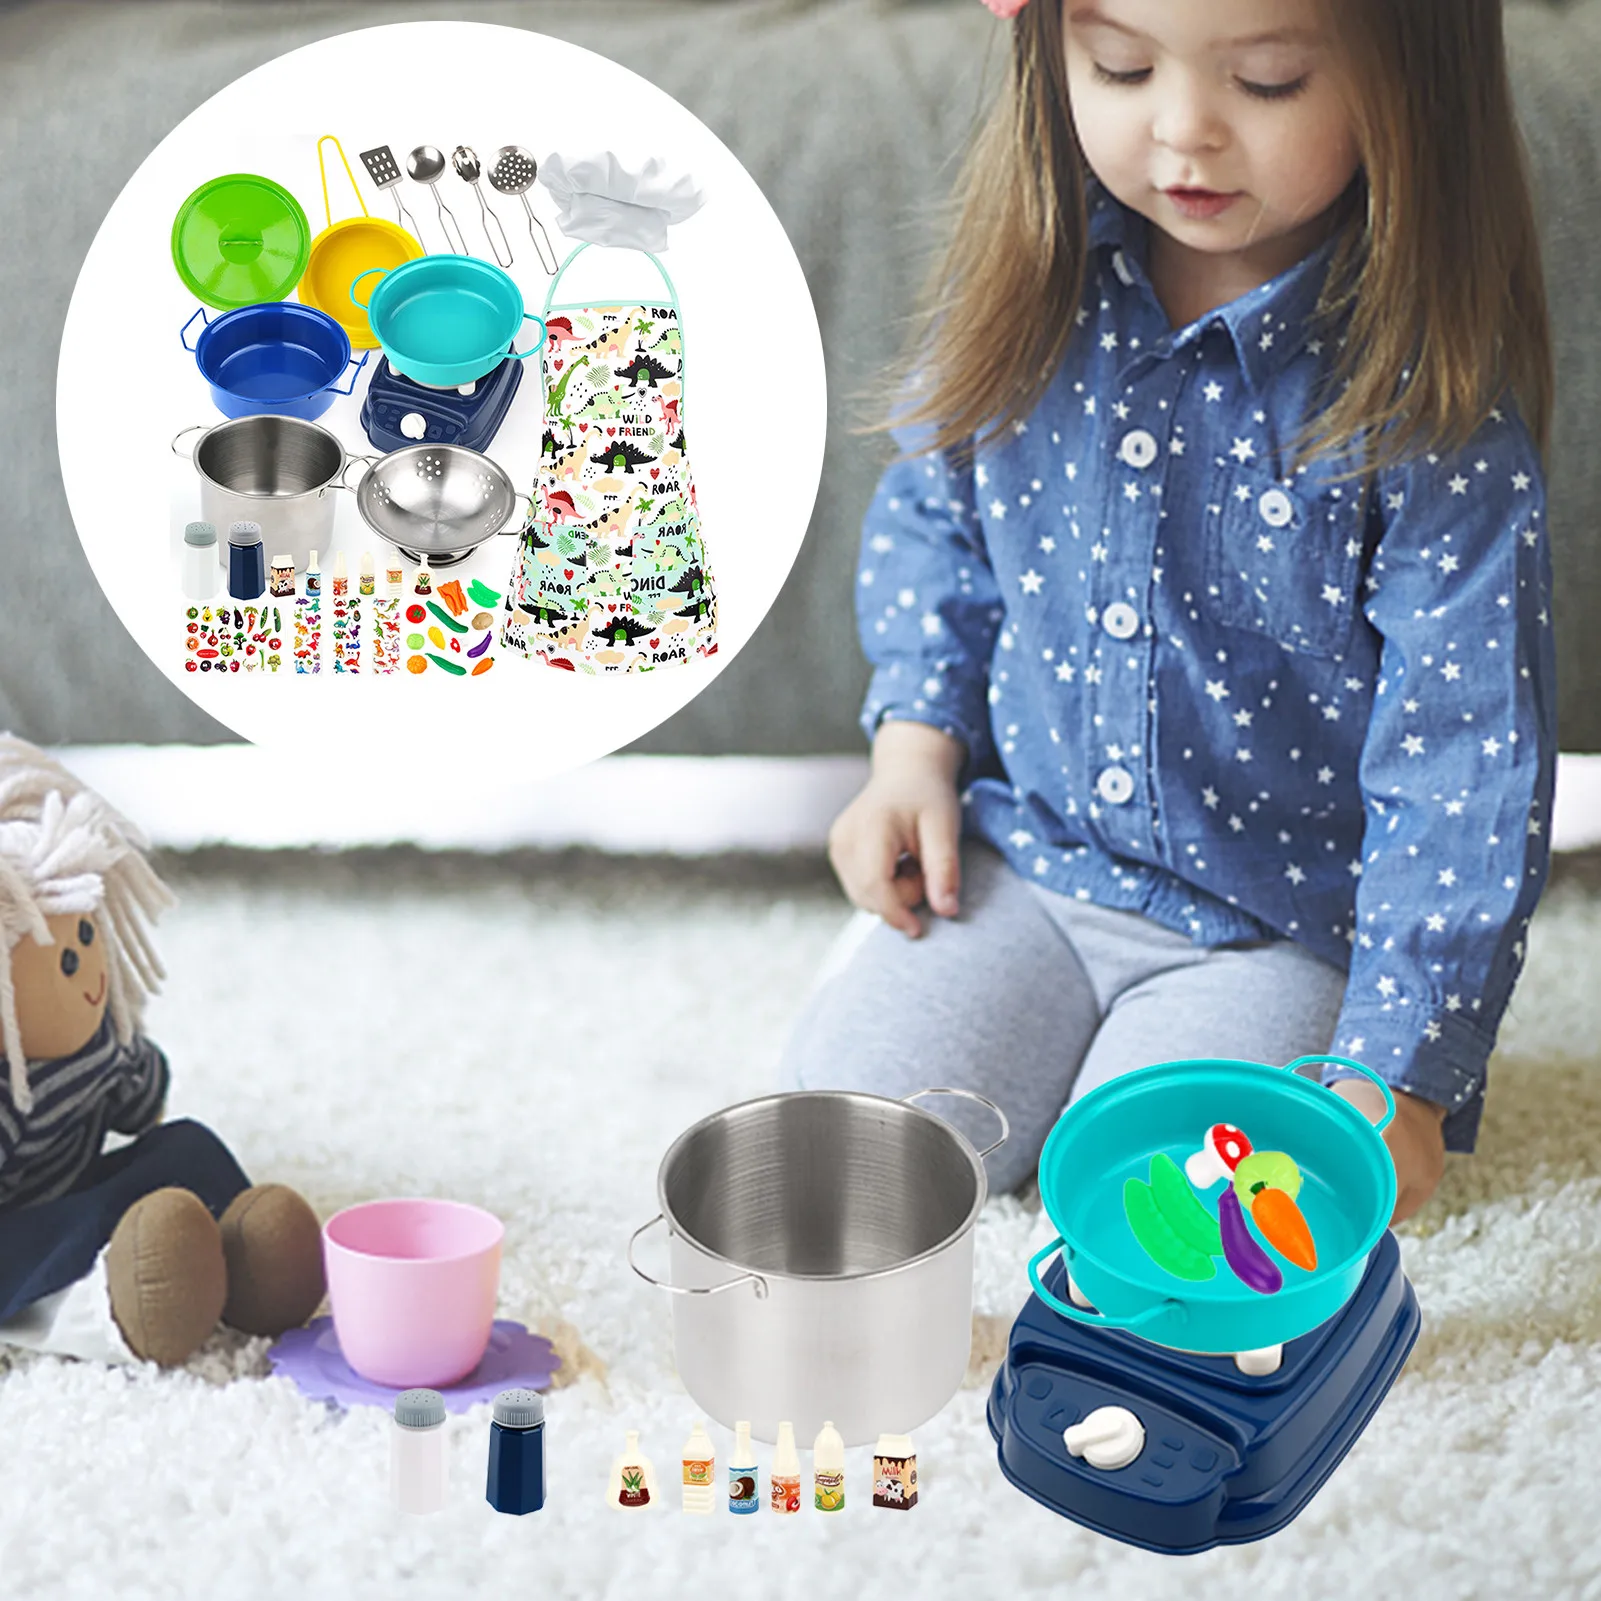 

Kids Cooking Set Kids Cooking And Baking Toys Play Pots And Pans Sets For Kids Toddlers Girls Boys Aged 3-8 37pcs Cooking Baking